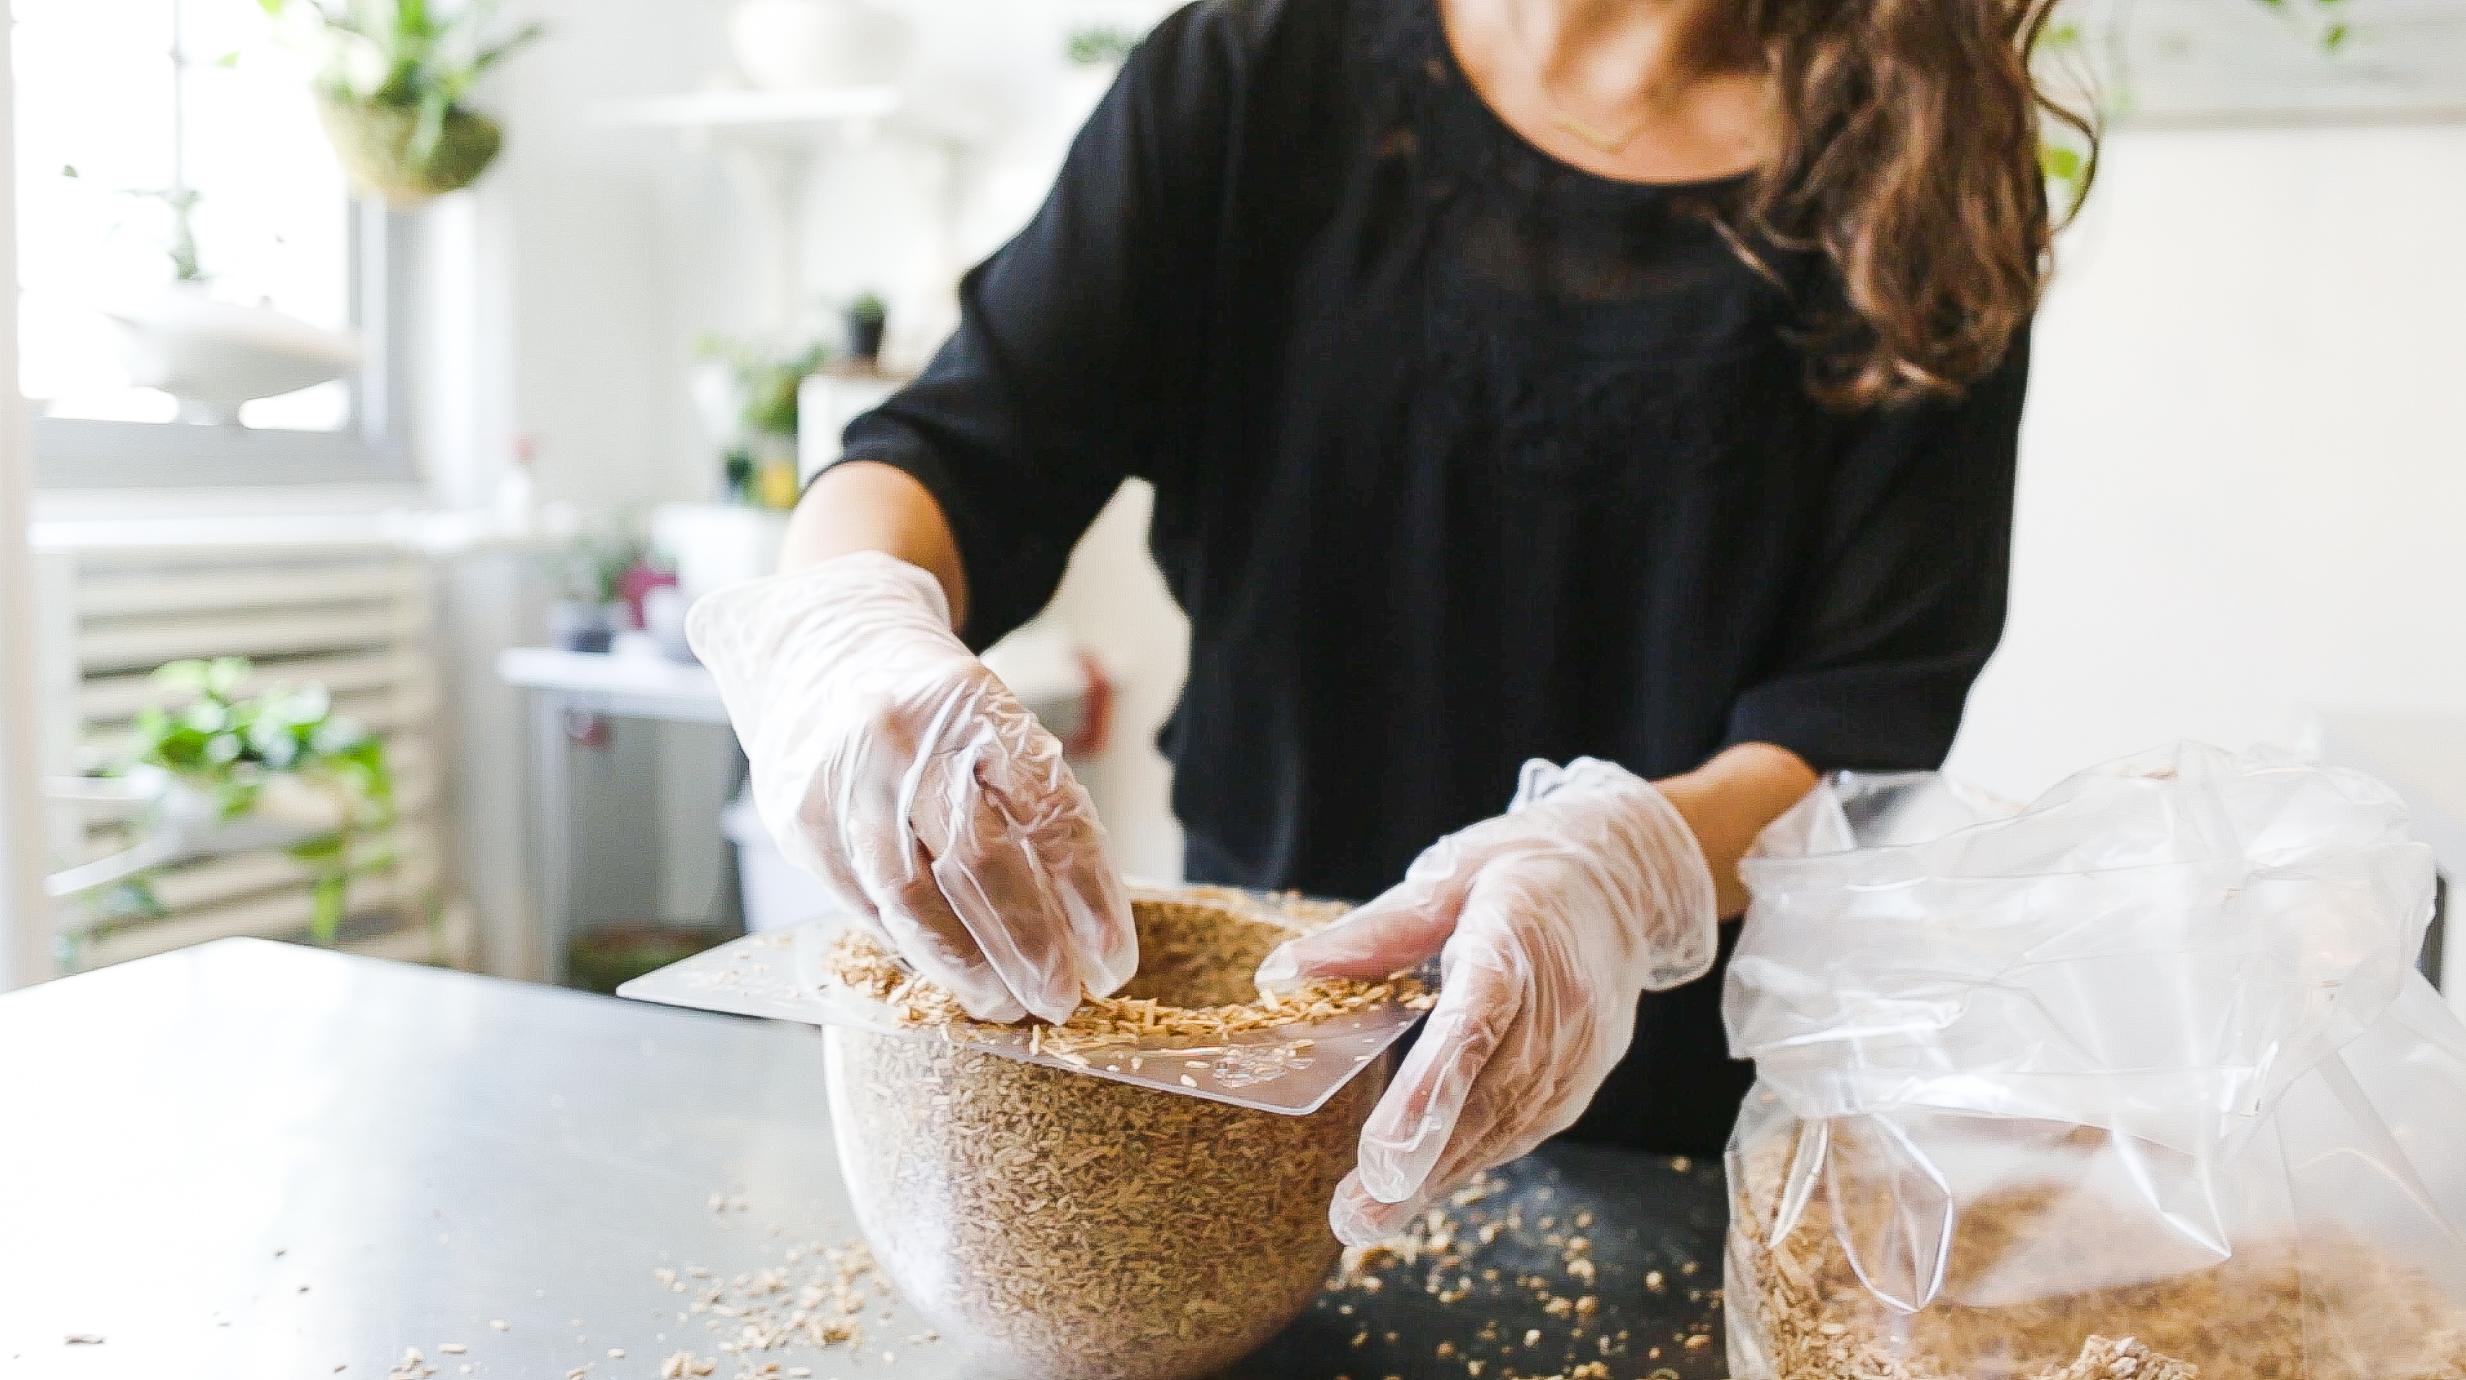 Drop In on Design | Biofabrication using Mushroom Mycelium. A woman wearing plastic gloves creates a bowl from a mold